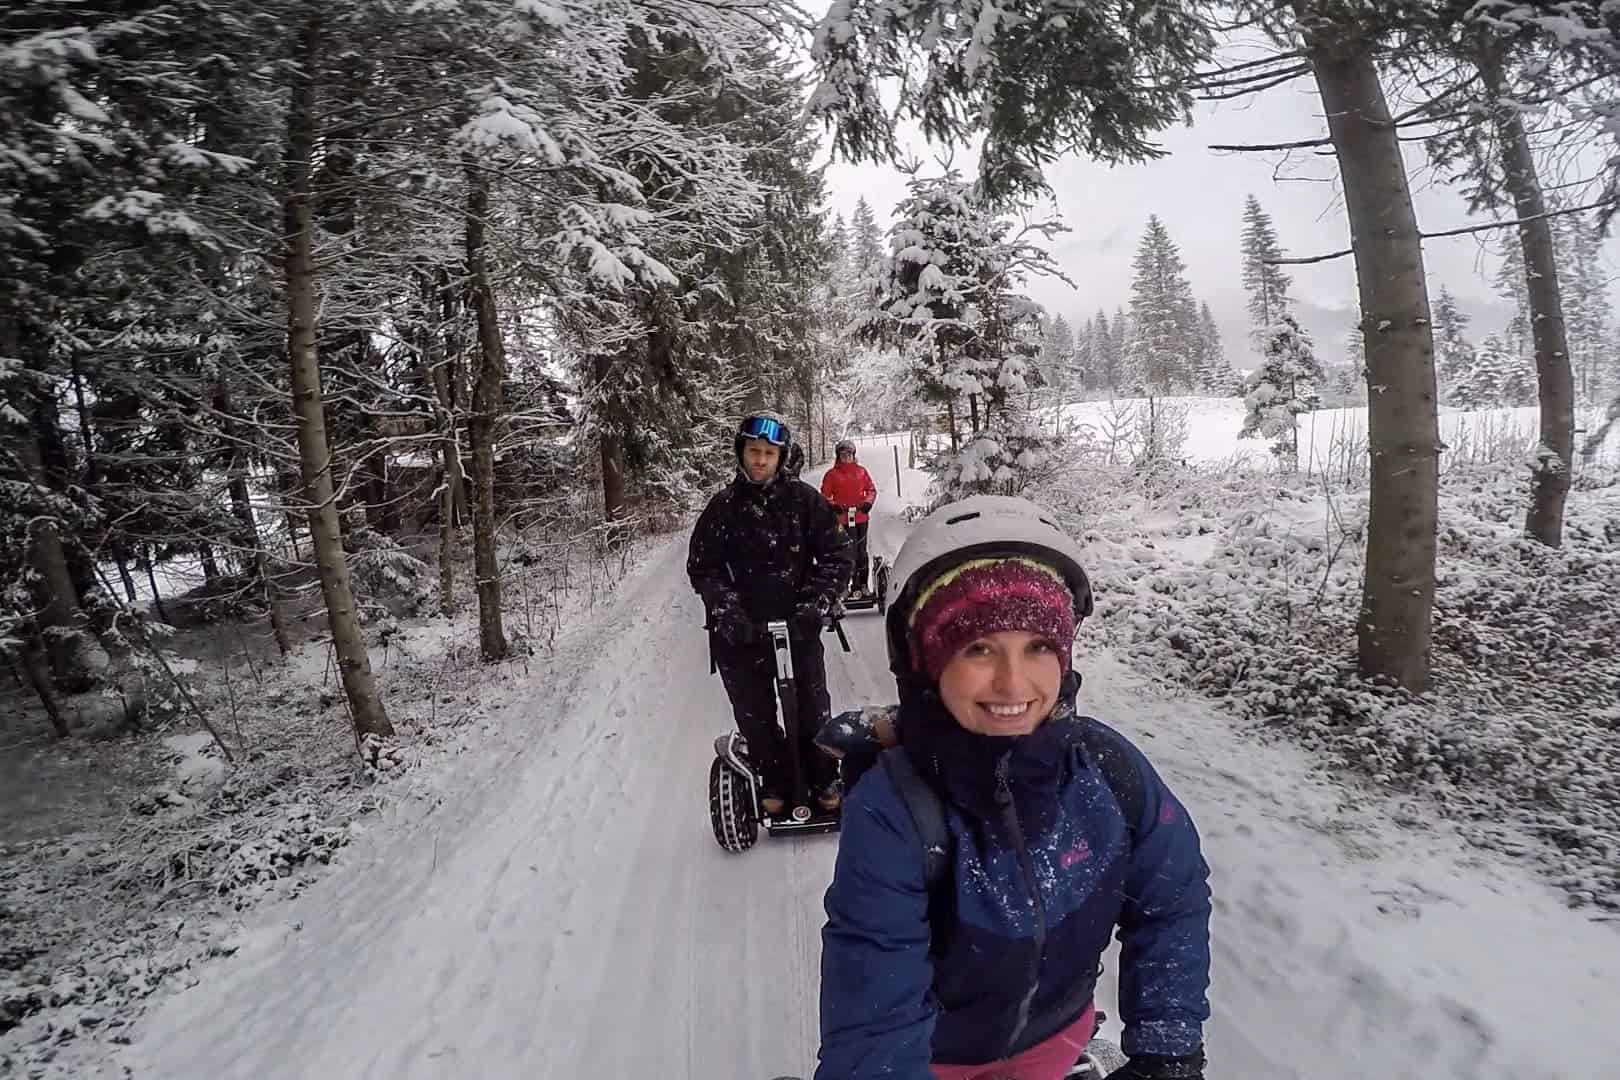 A group segways in the snow during the Winter season in Austria